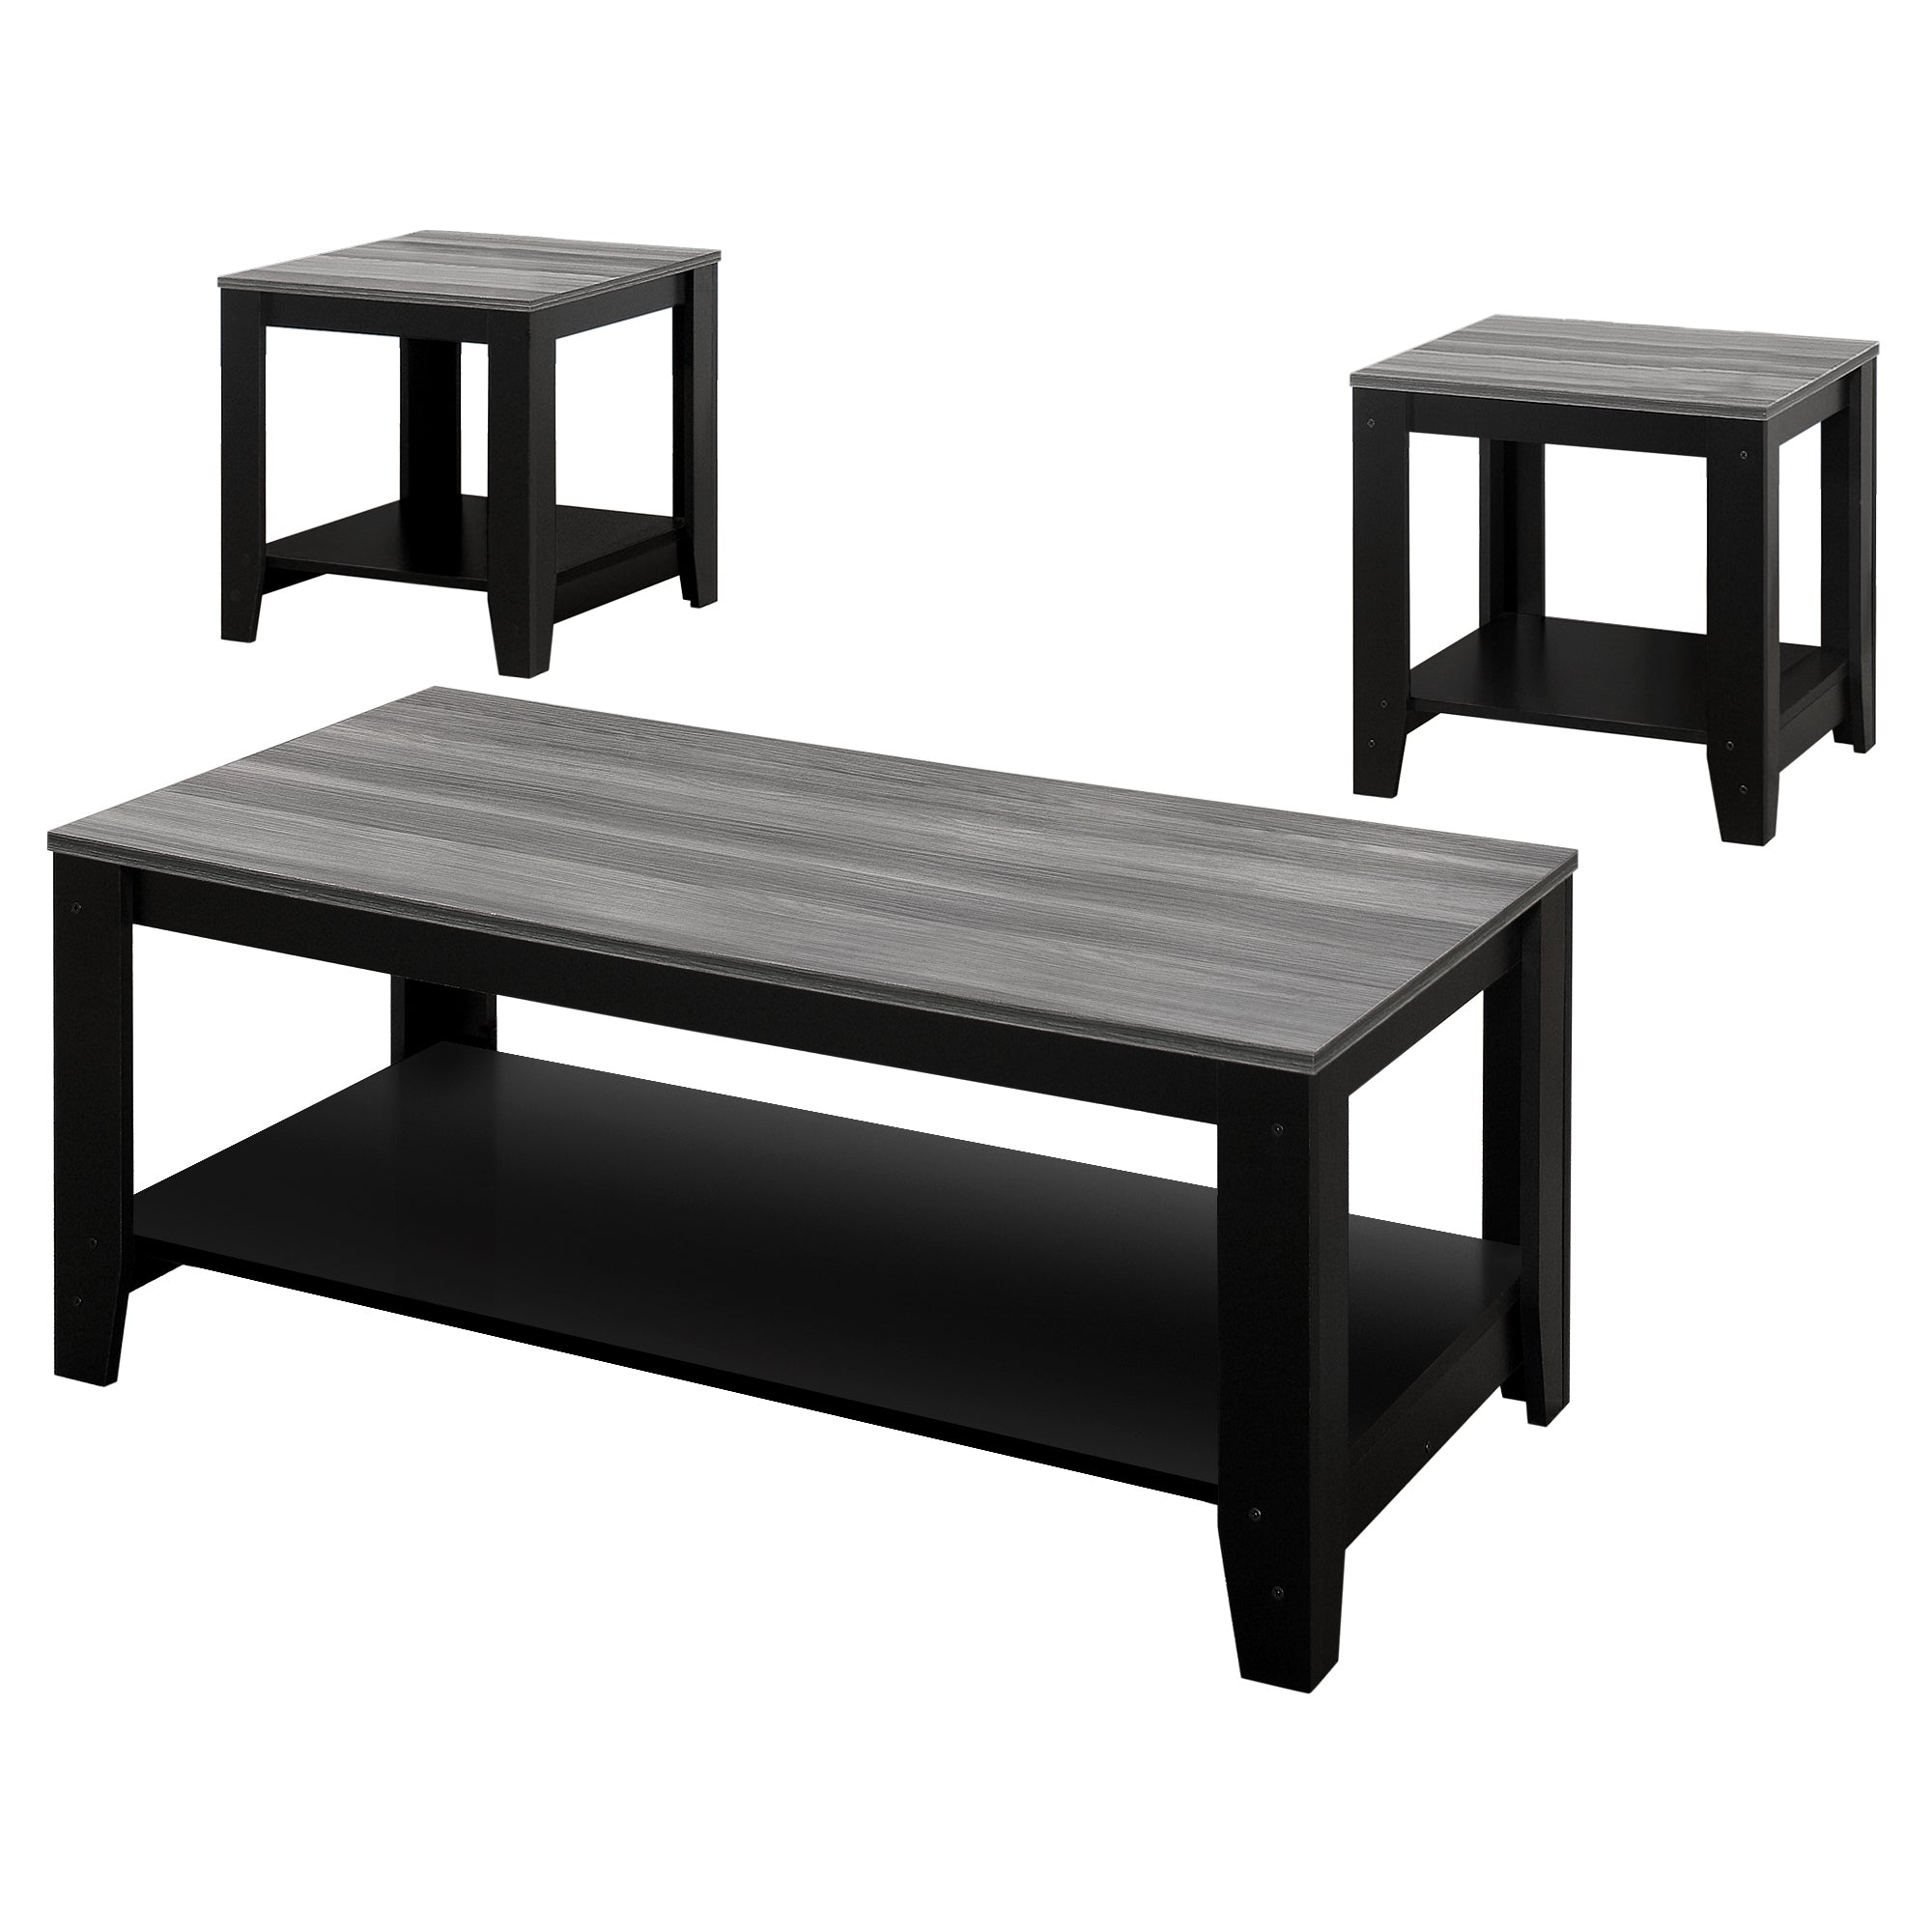 MN-897992P    Table Set, 3Pcs Set, Coffee, End, Side, Accent, Living Room, Laminate, Black, Grey, Contemporary, Modern